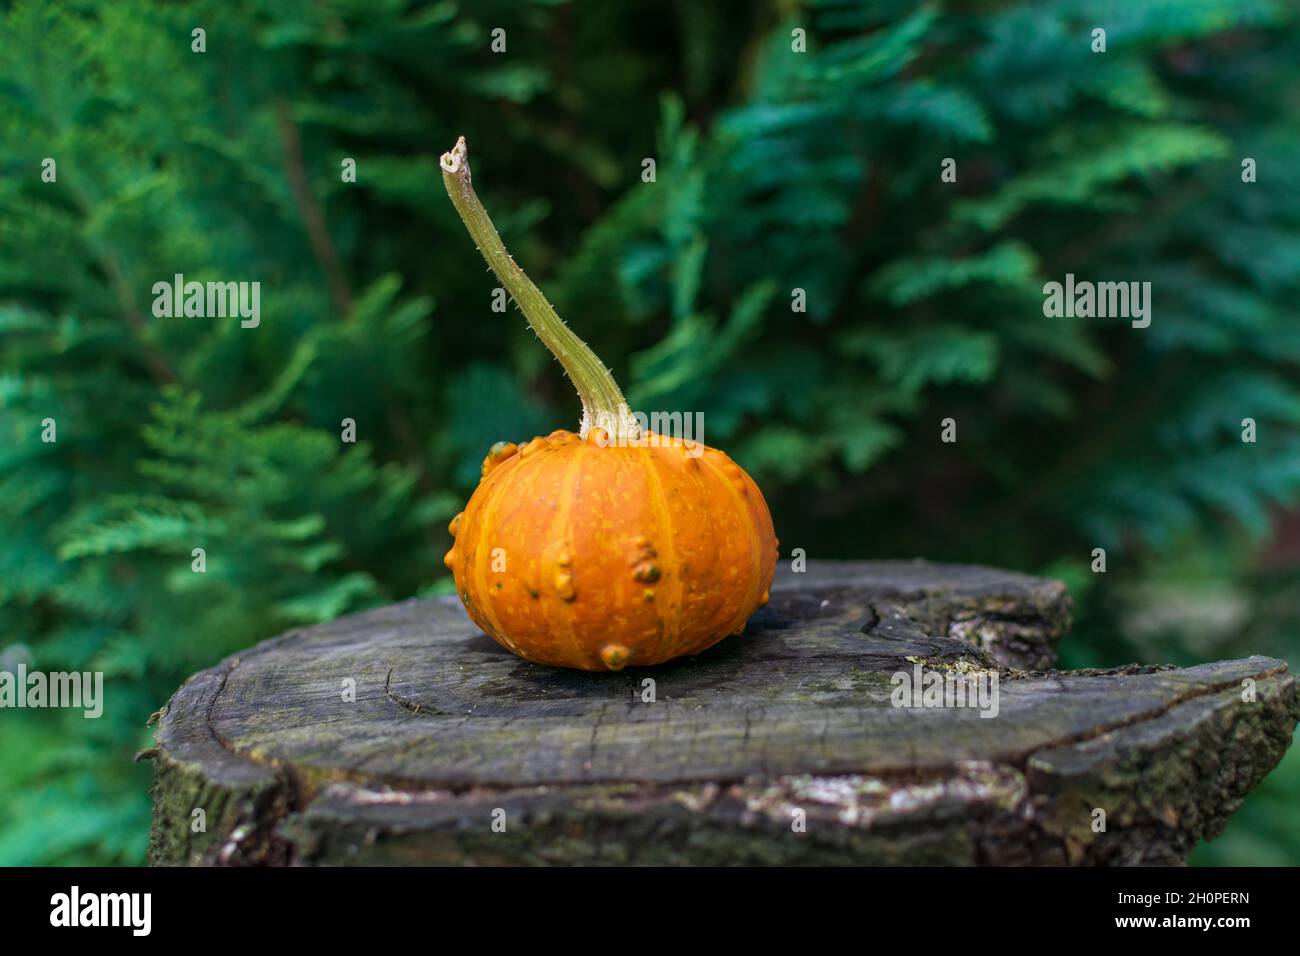 Pumpkin Zombie Hybrid on a wooden table in nature Stock Photo